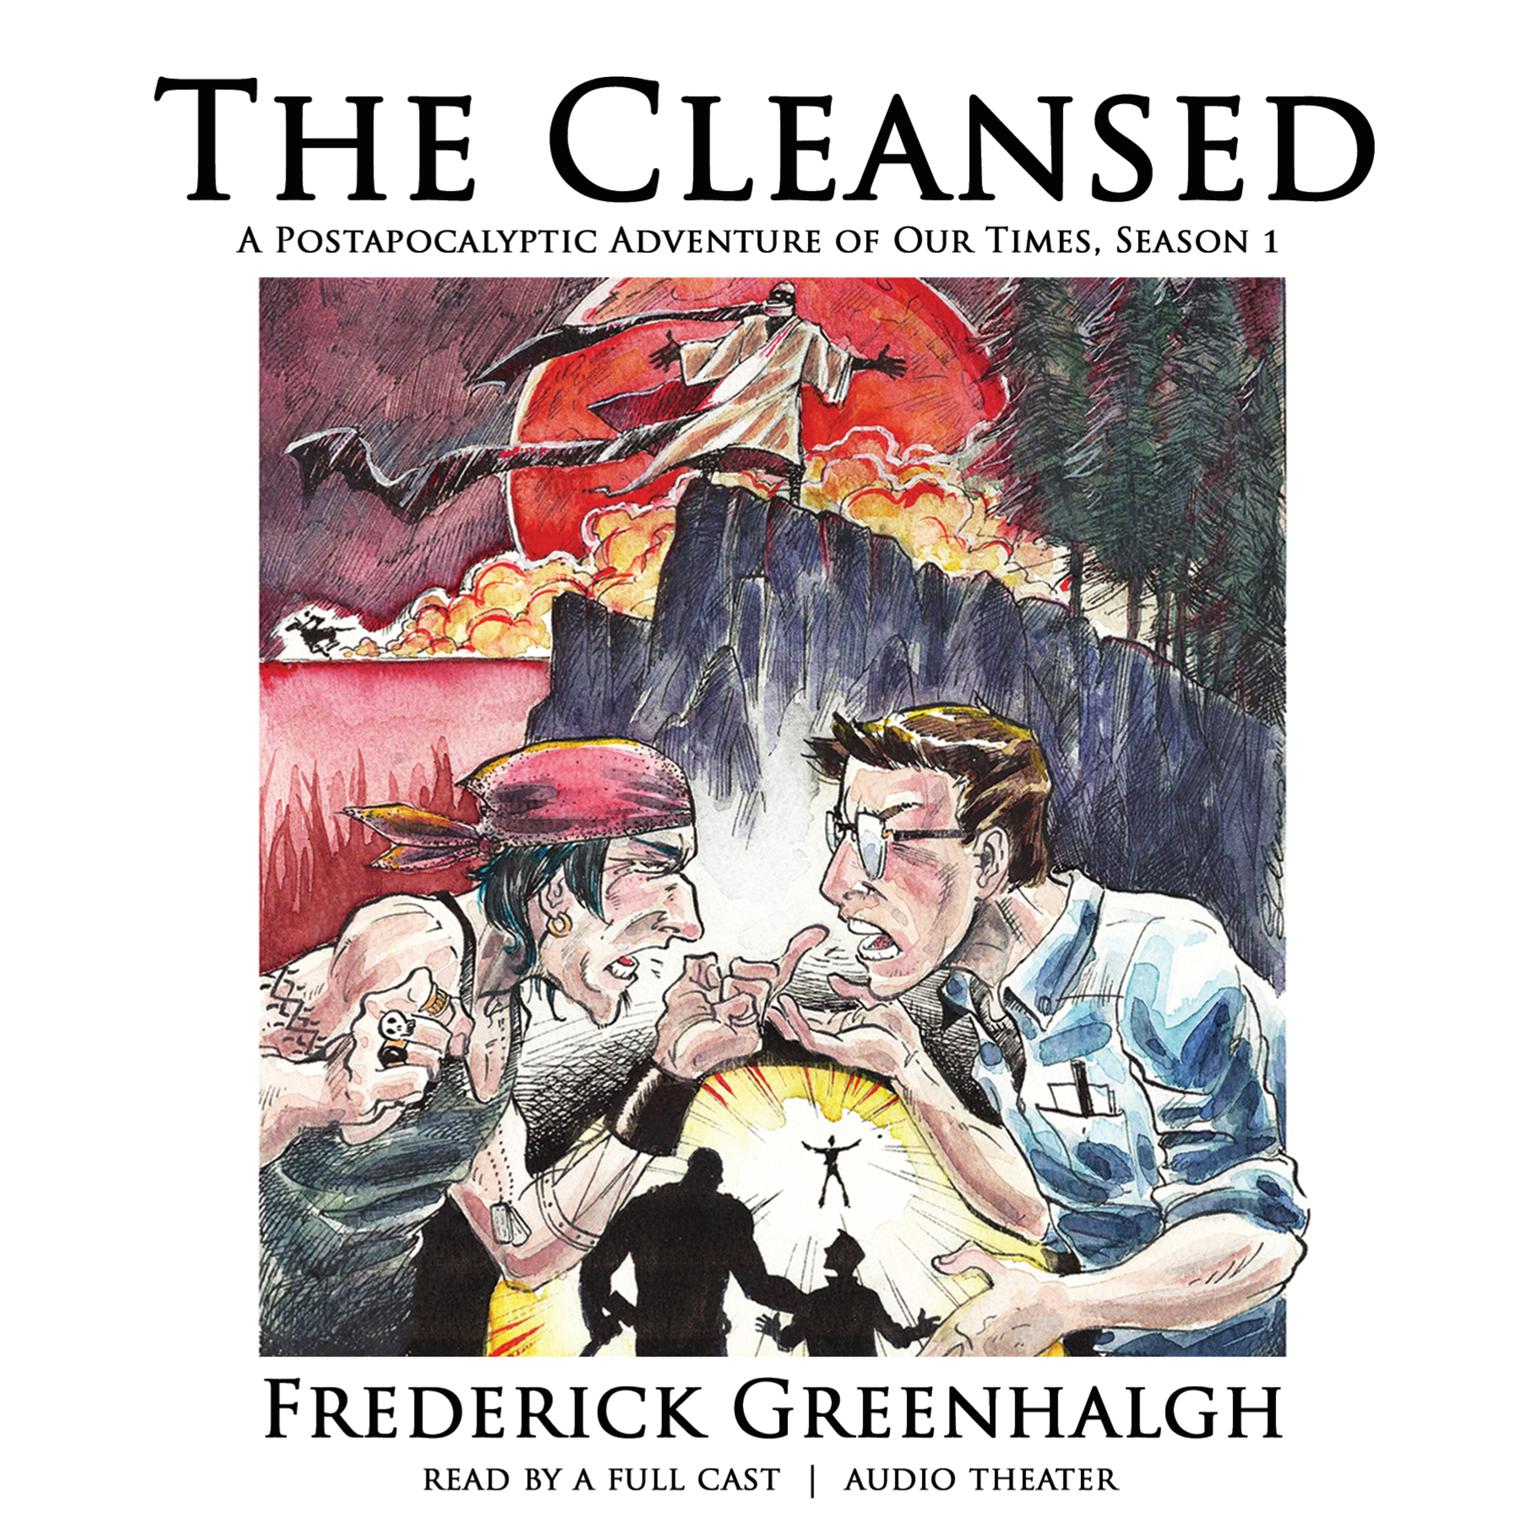 The Cleansed, Season 1: A Postapocalyptic Adventure of Our Times Audiobook, by Frederick Greenhalgh